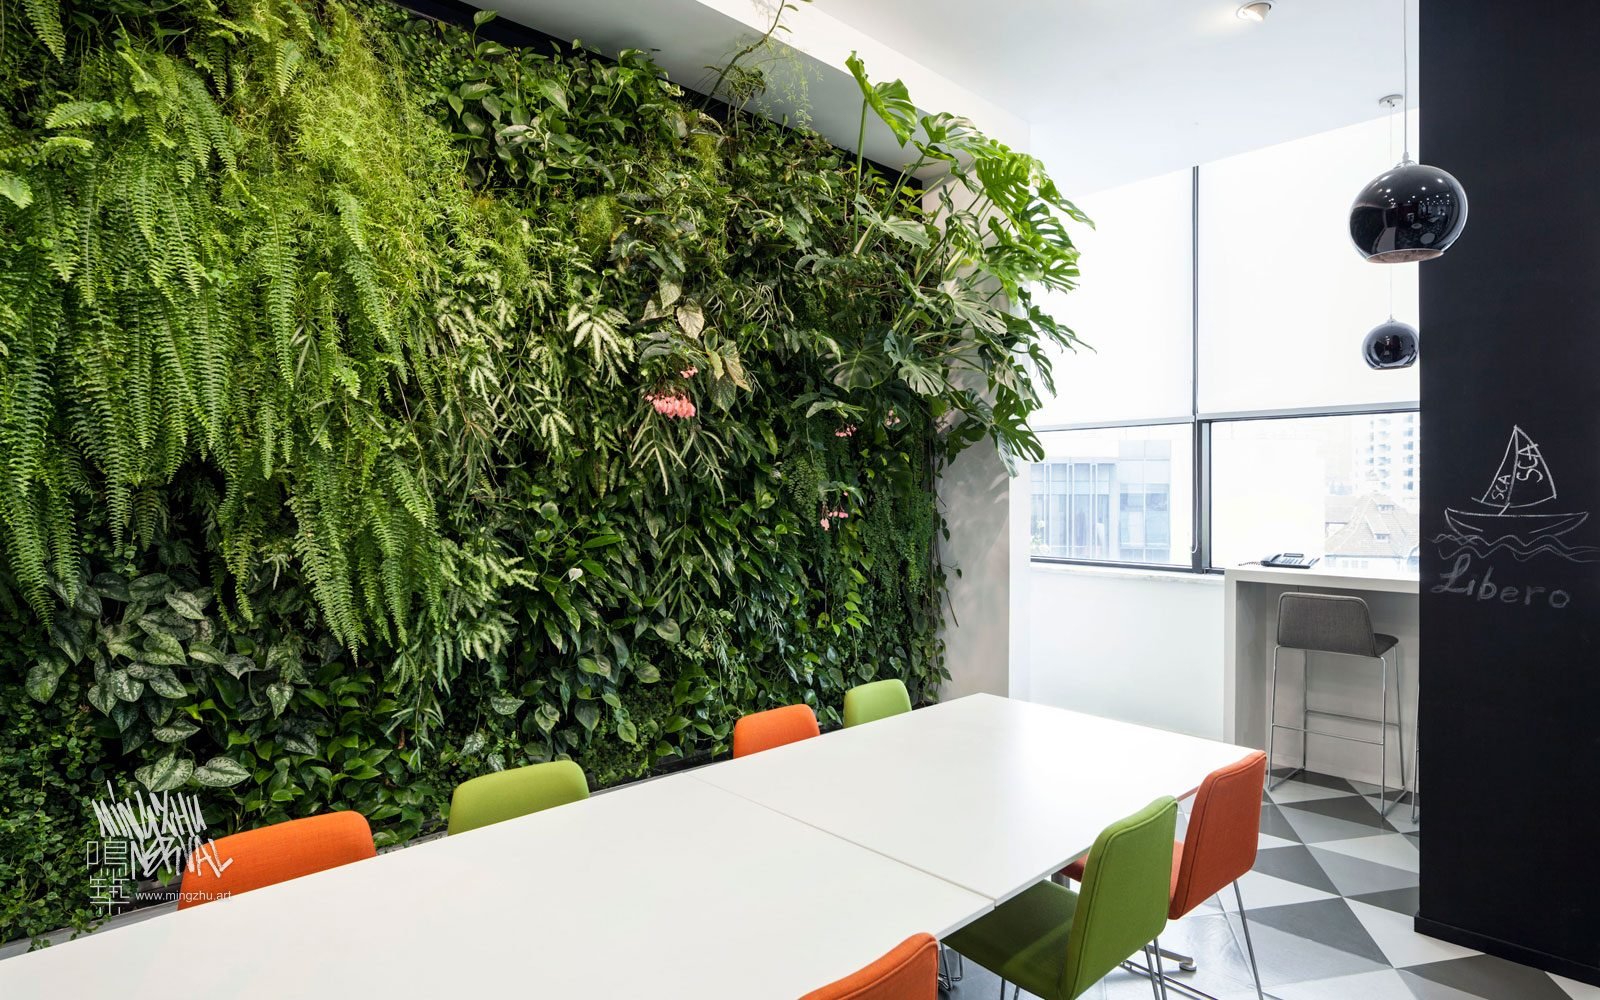 At Mingzhu Nerval, we thrive at creating the most beautiful vertical gardens in the world. For SCA, we created a fresh living wall design - Shanghai, 2011.